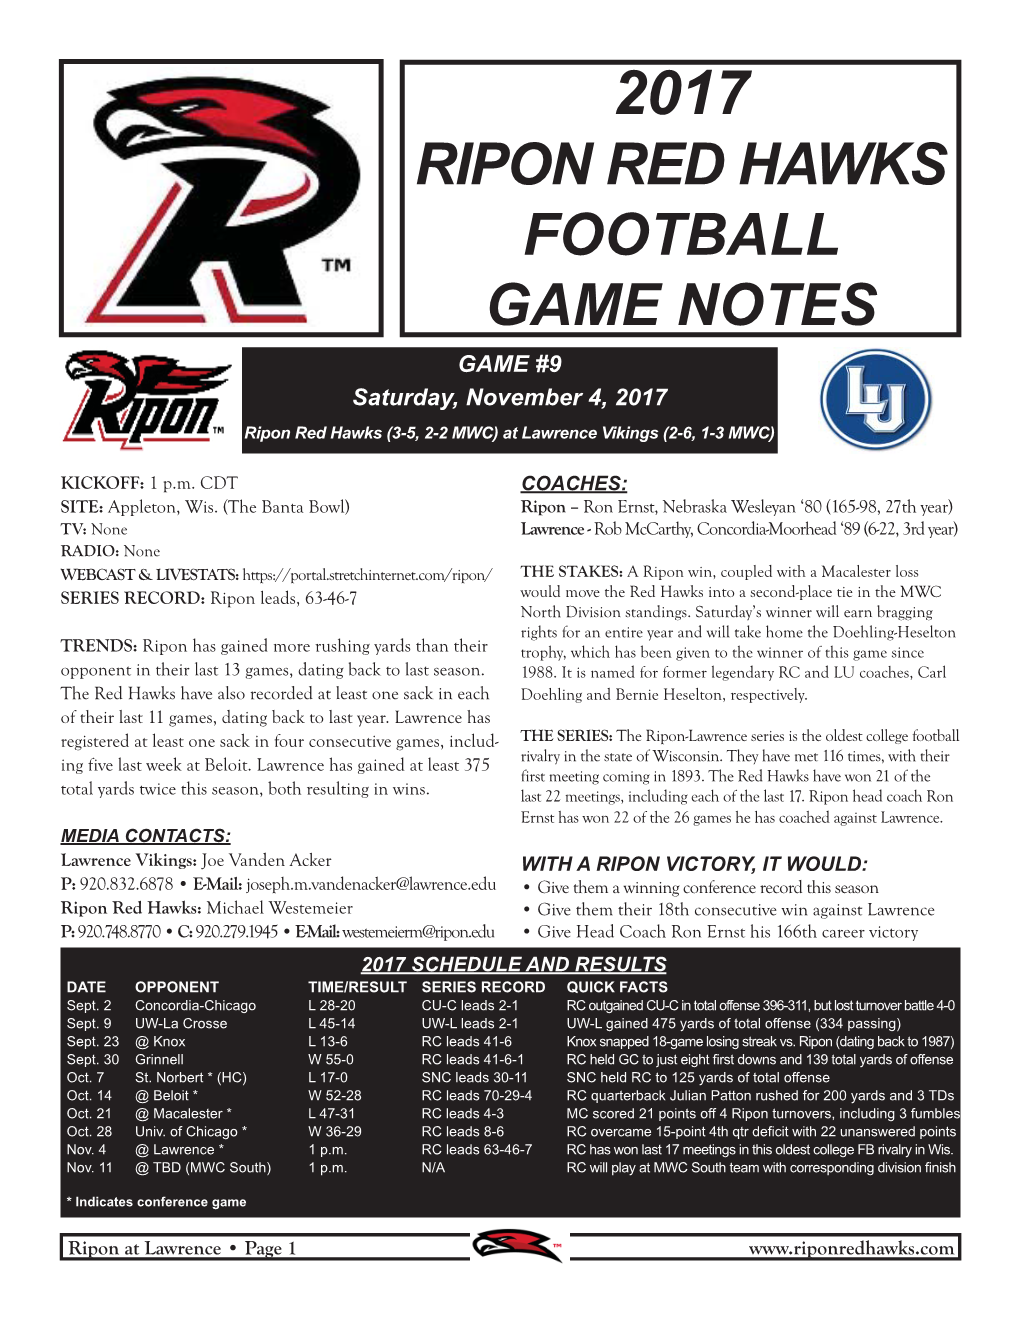 Game Notes Vs. Lawrence.Indd